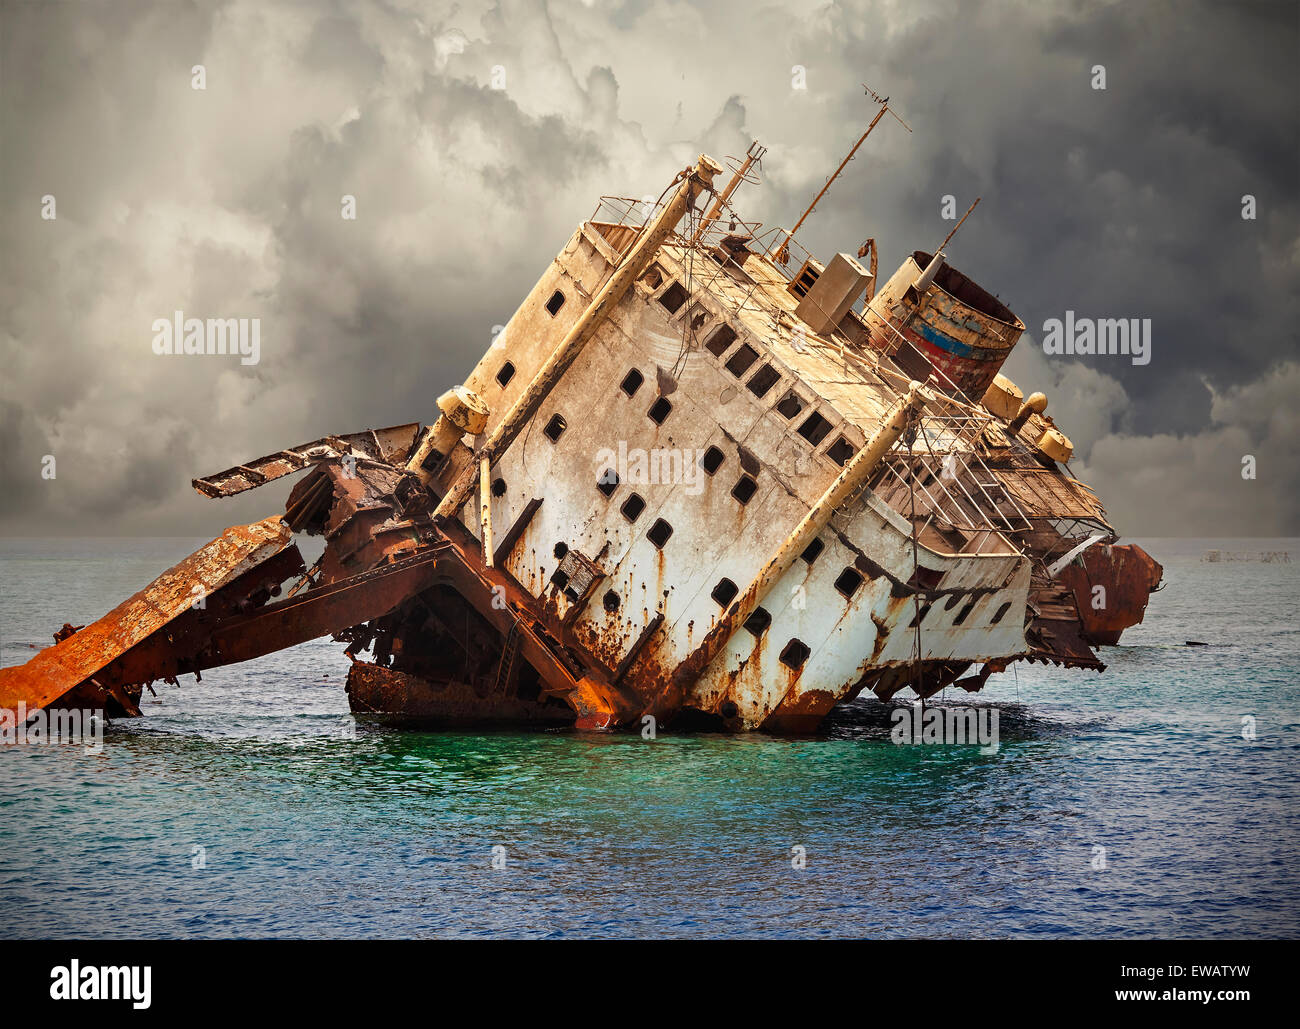 The sunken shipwreck on the reef, Red Sea in Egypt. Stock Photo